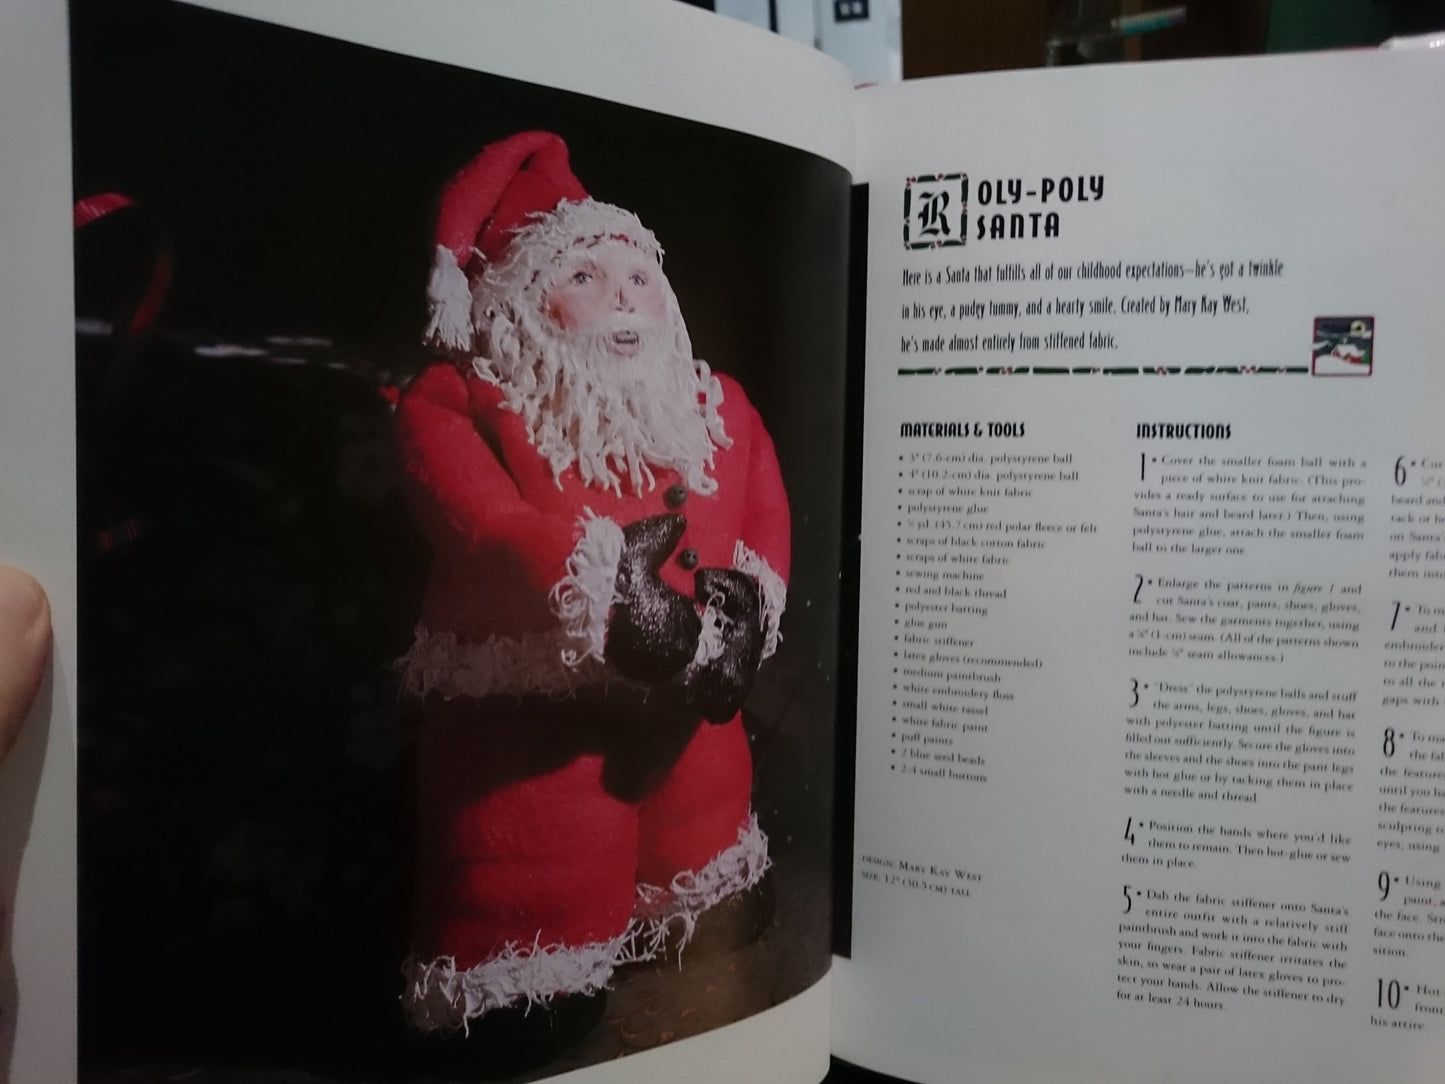 A Crafter's Book Of Santas: More Than 50 Festive Projects